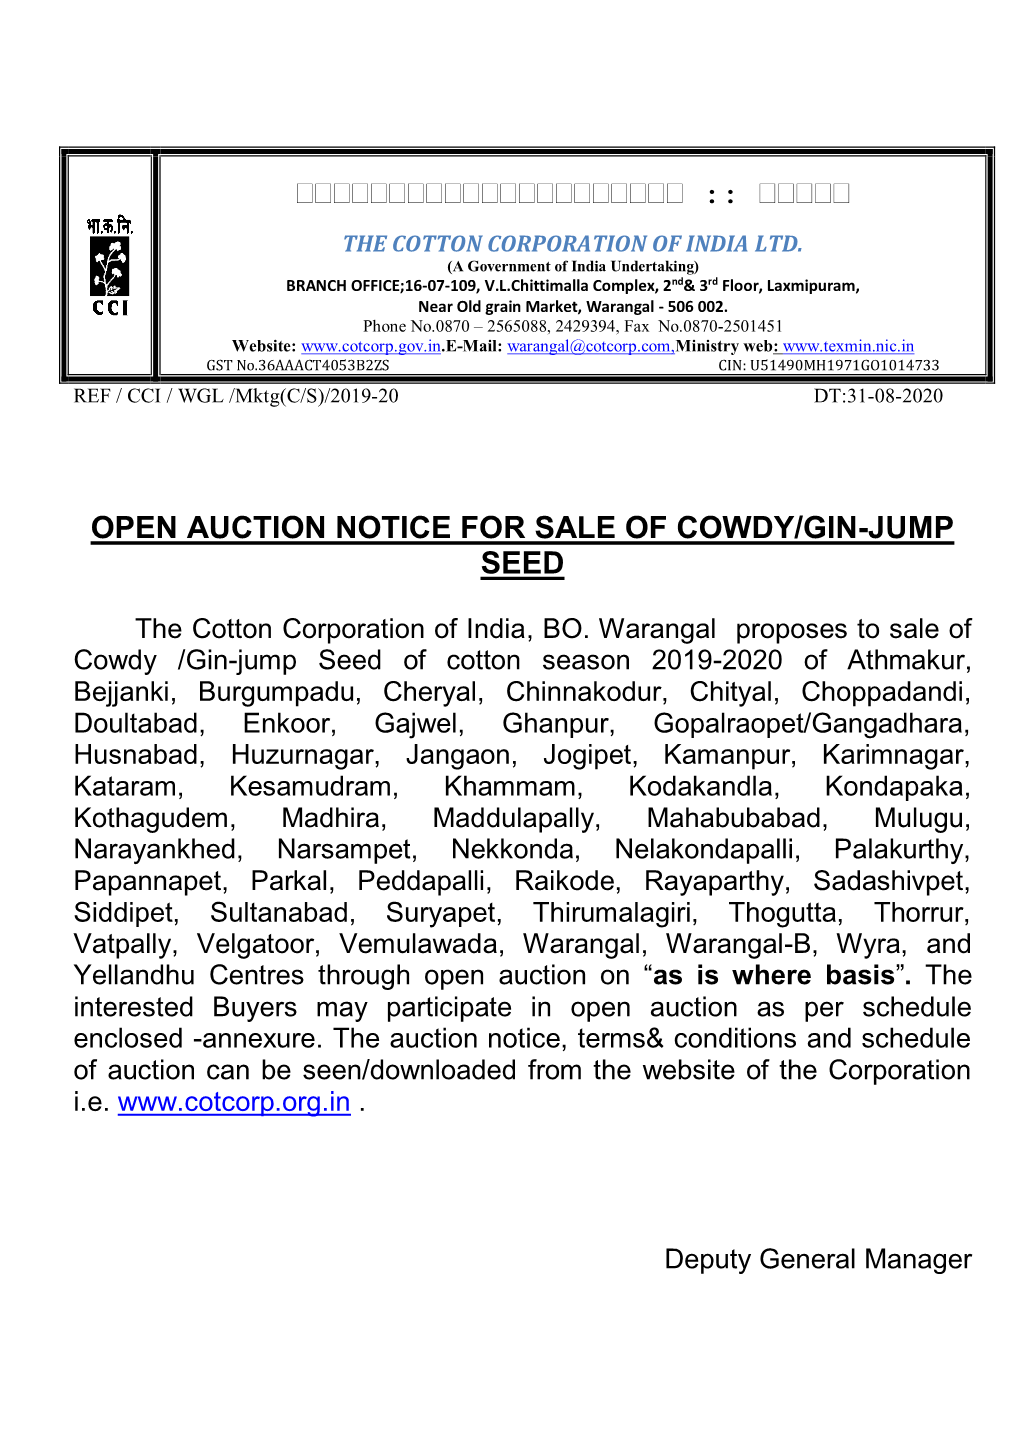 Open Auction Notice for Sale of Cowdy/Gin-Jump Seed